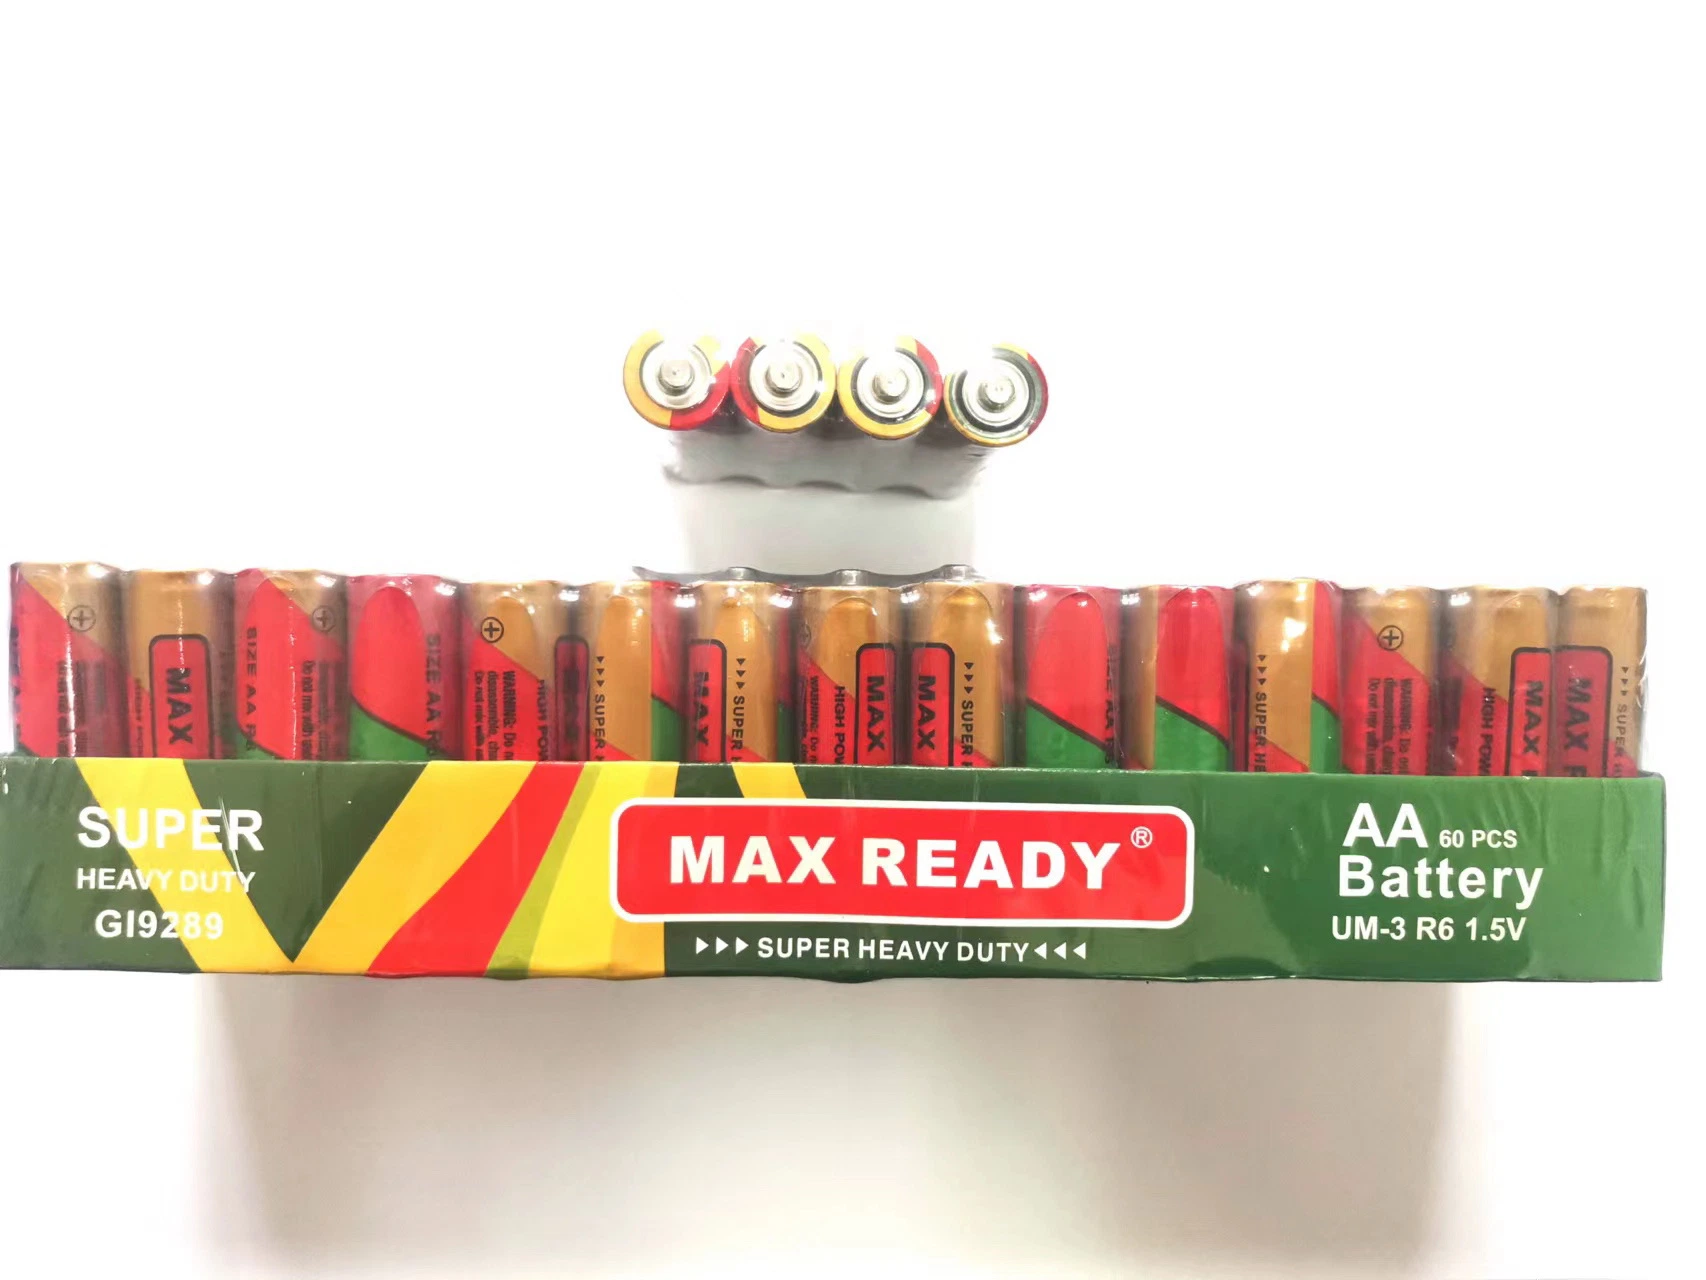 Powerful Cheap Price Max Ready R6 Um-3 1.5V Carbon Zinc Battery Dry Battery Battery Cell